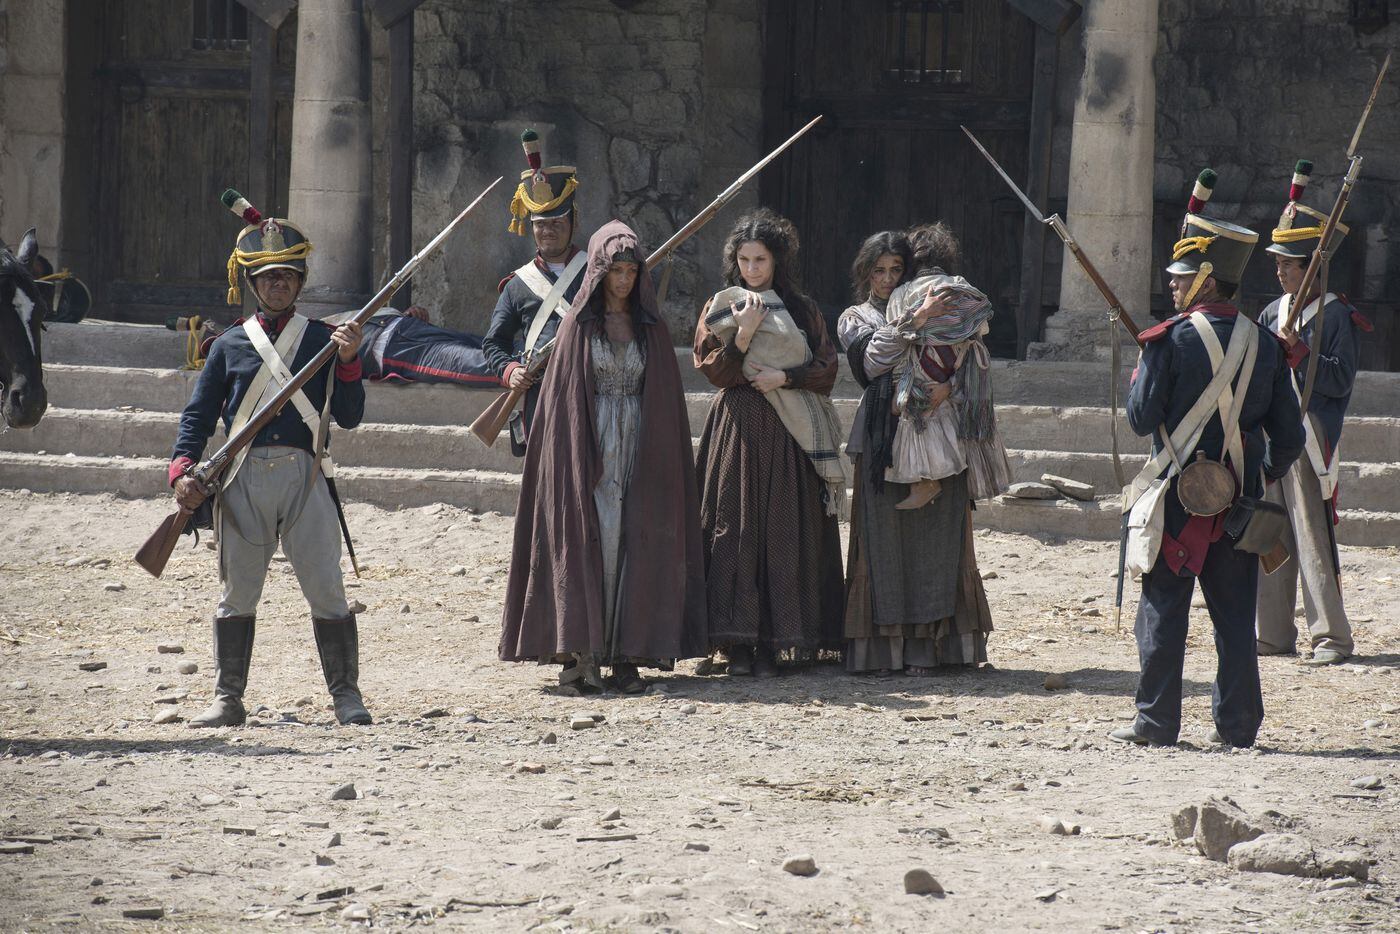 "Texas Rising" details what followed in the fight for an independent Texas.